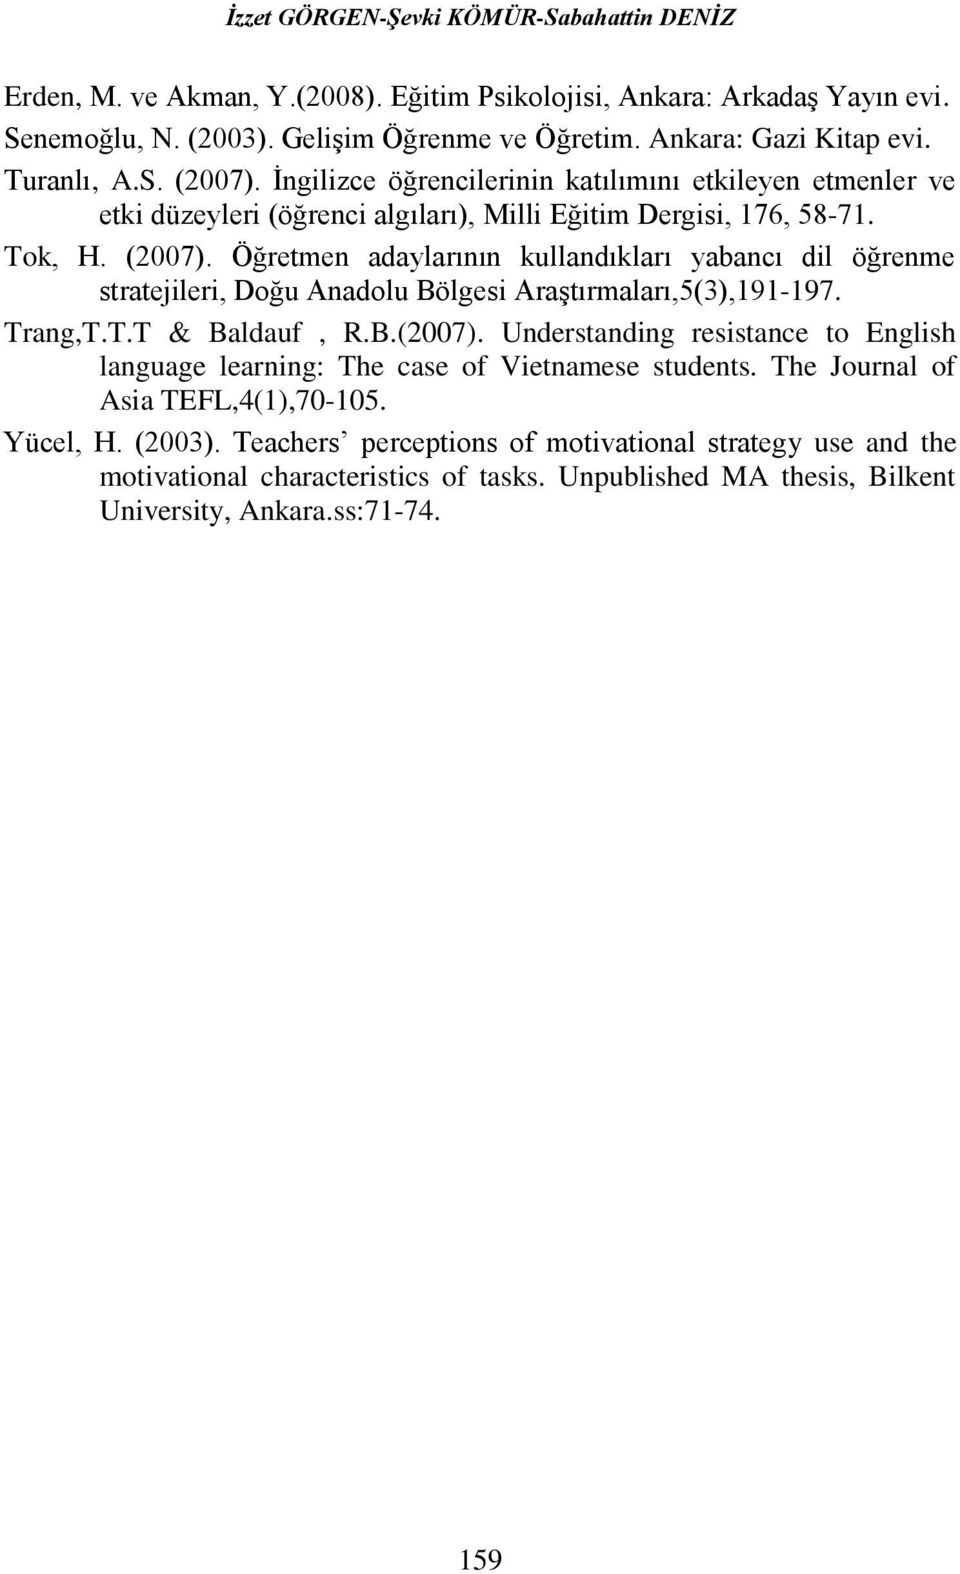 Trang,T.T.T & Baldauf, R.B.(2007). Understanding resistance to English language learning: The case of Vietnamese students. The Journal of Asia TEFL,4(1),70-105. Yücel, H. (2003).